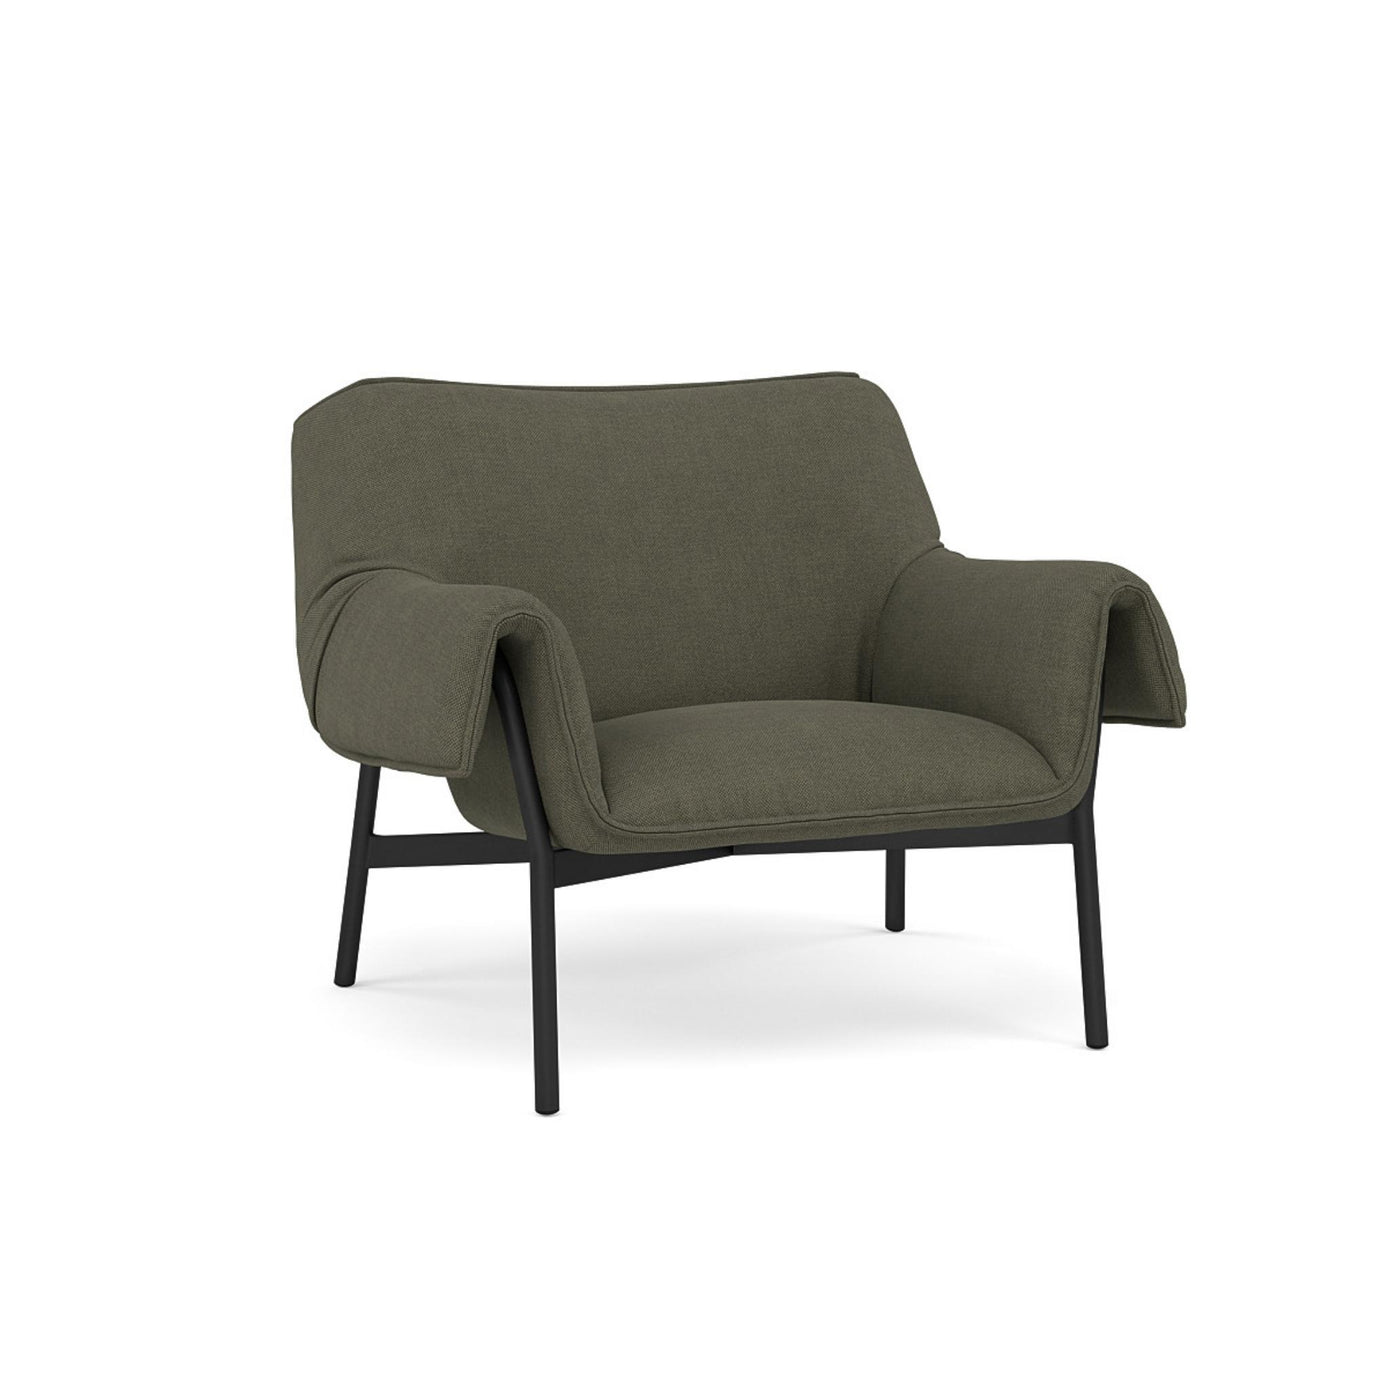 Muuto Wrap Lounge Chair. Made to order from someday designs. #colour_fiord-961